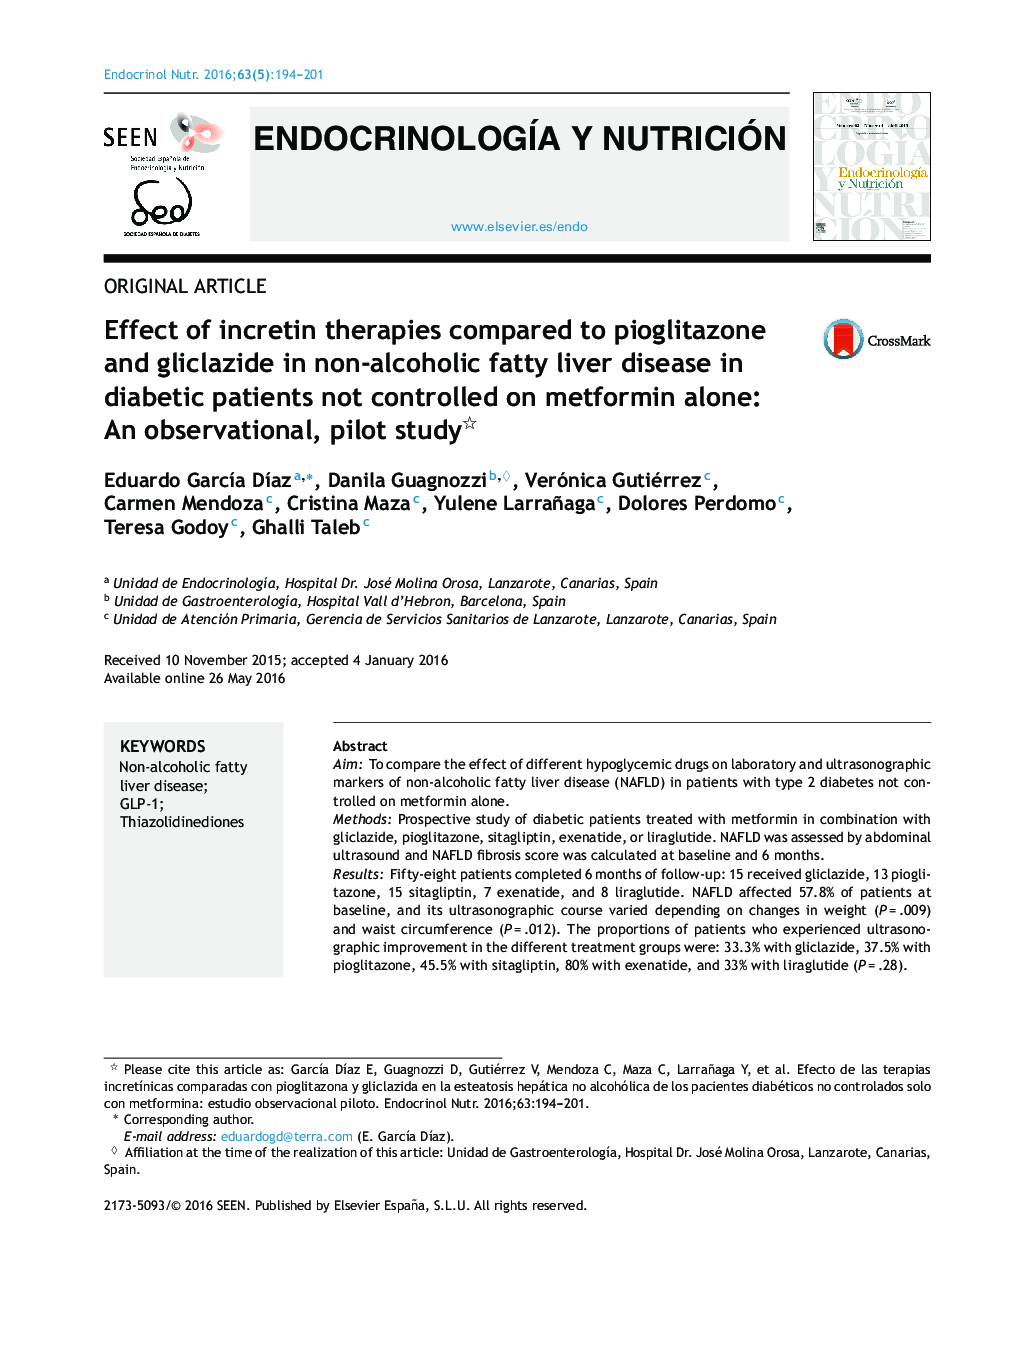 Effect of incretin therapies compared to pioglitazone and gliclazide in non-alcoholic fatty liver disease in diabetic patients not controlled on metformin alone: An observational, pilot study 